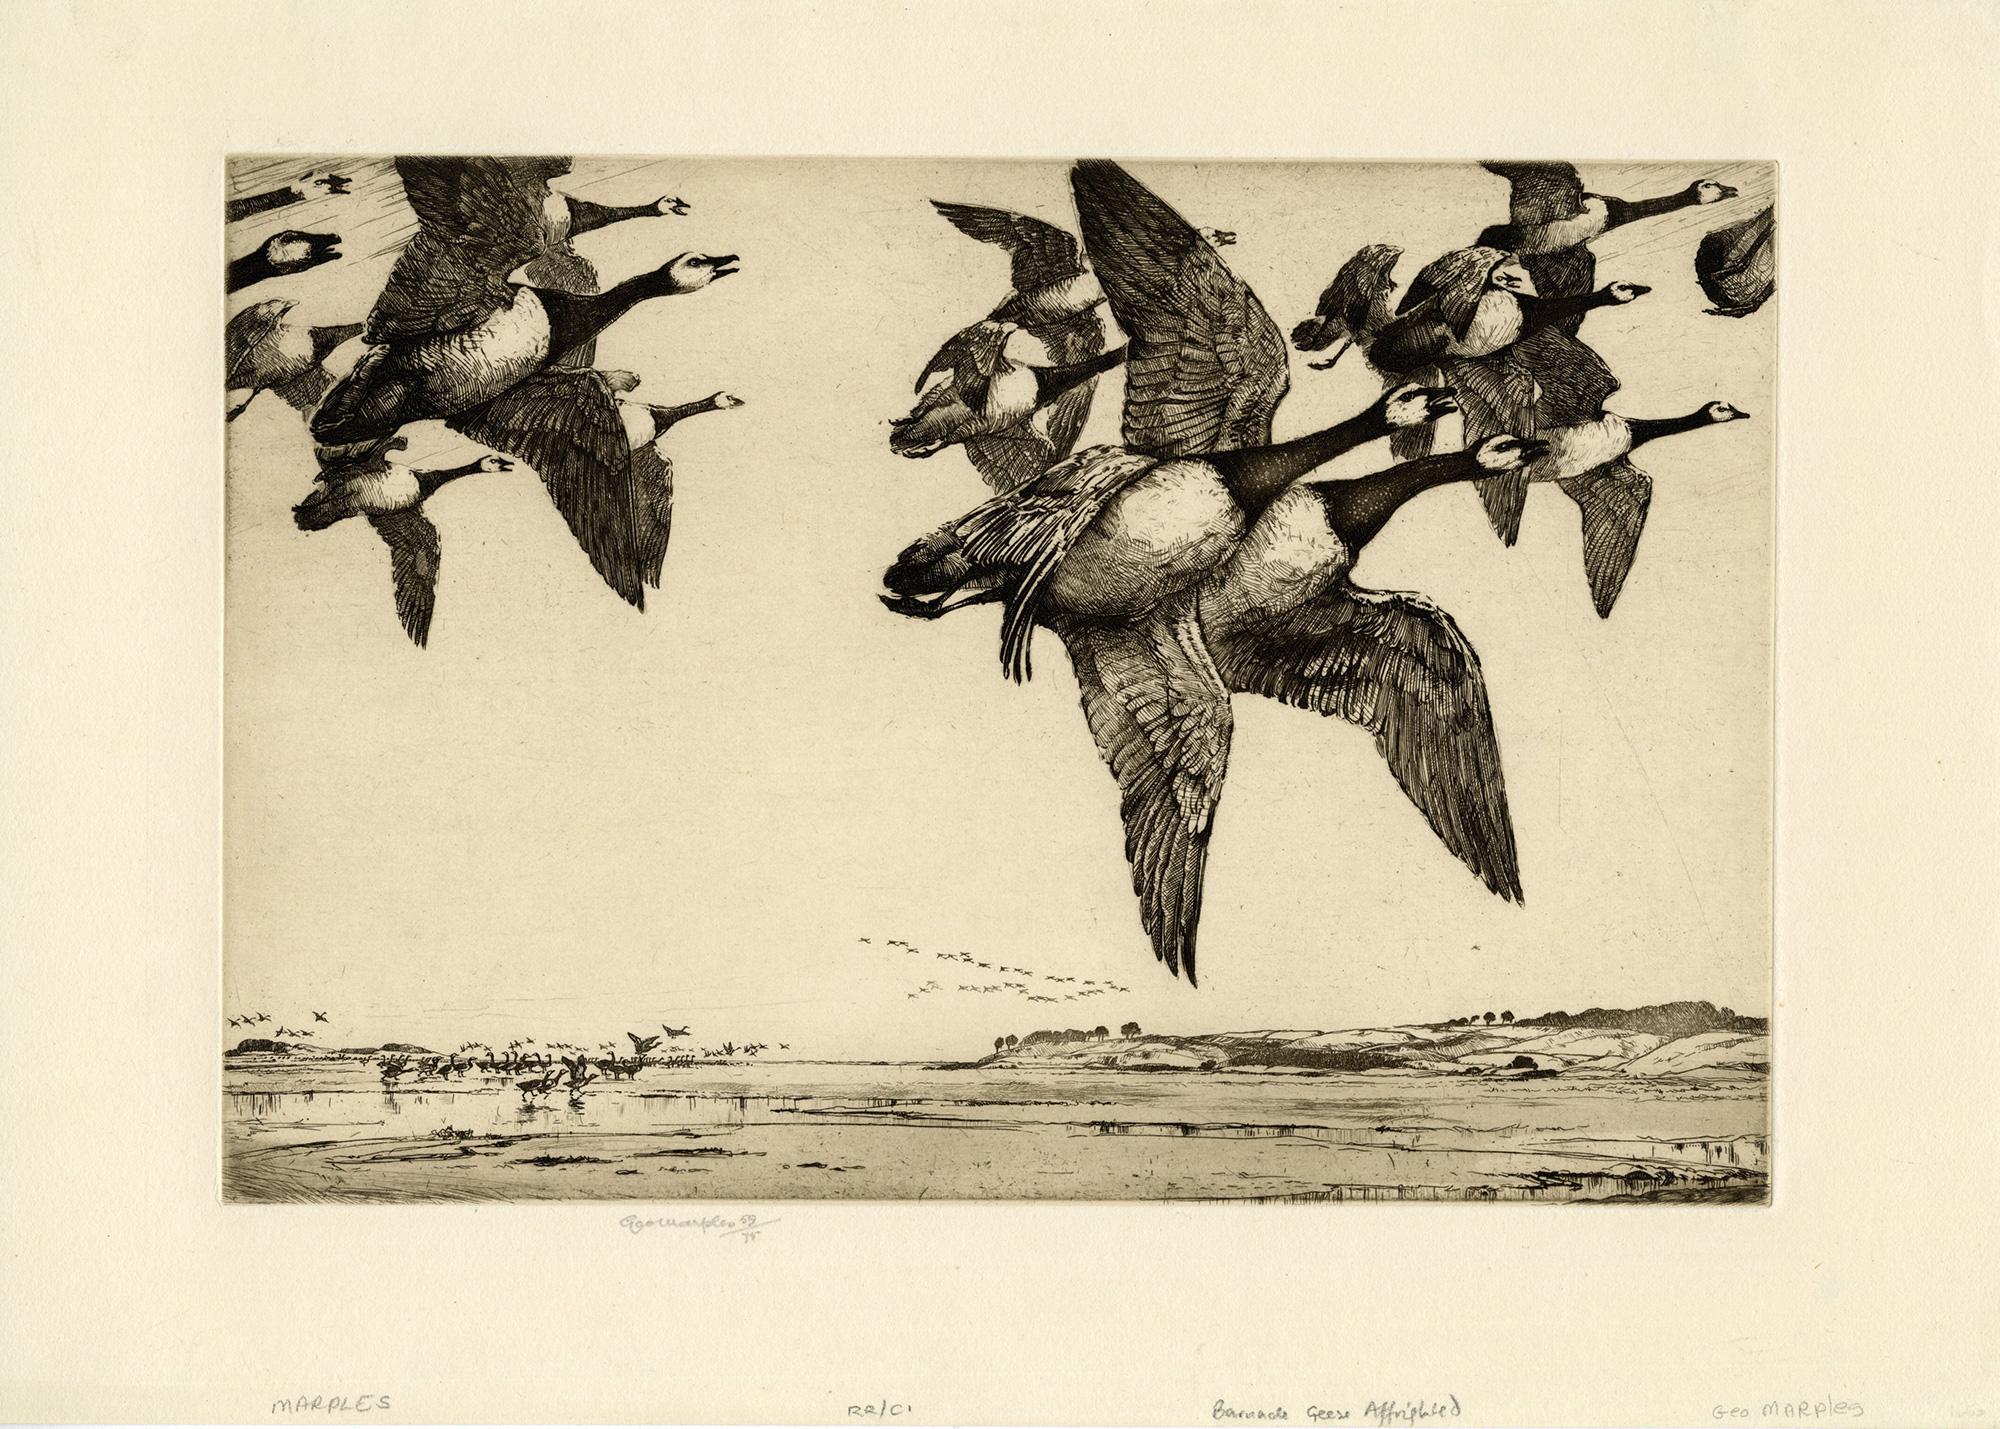 George Marples Figurative Print - Barnacle Geese Affrighted